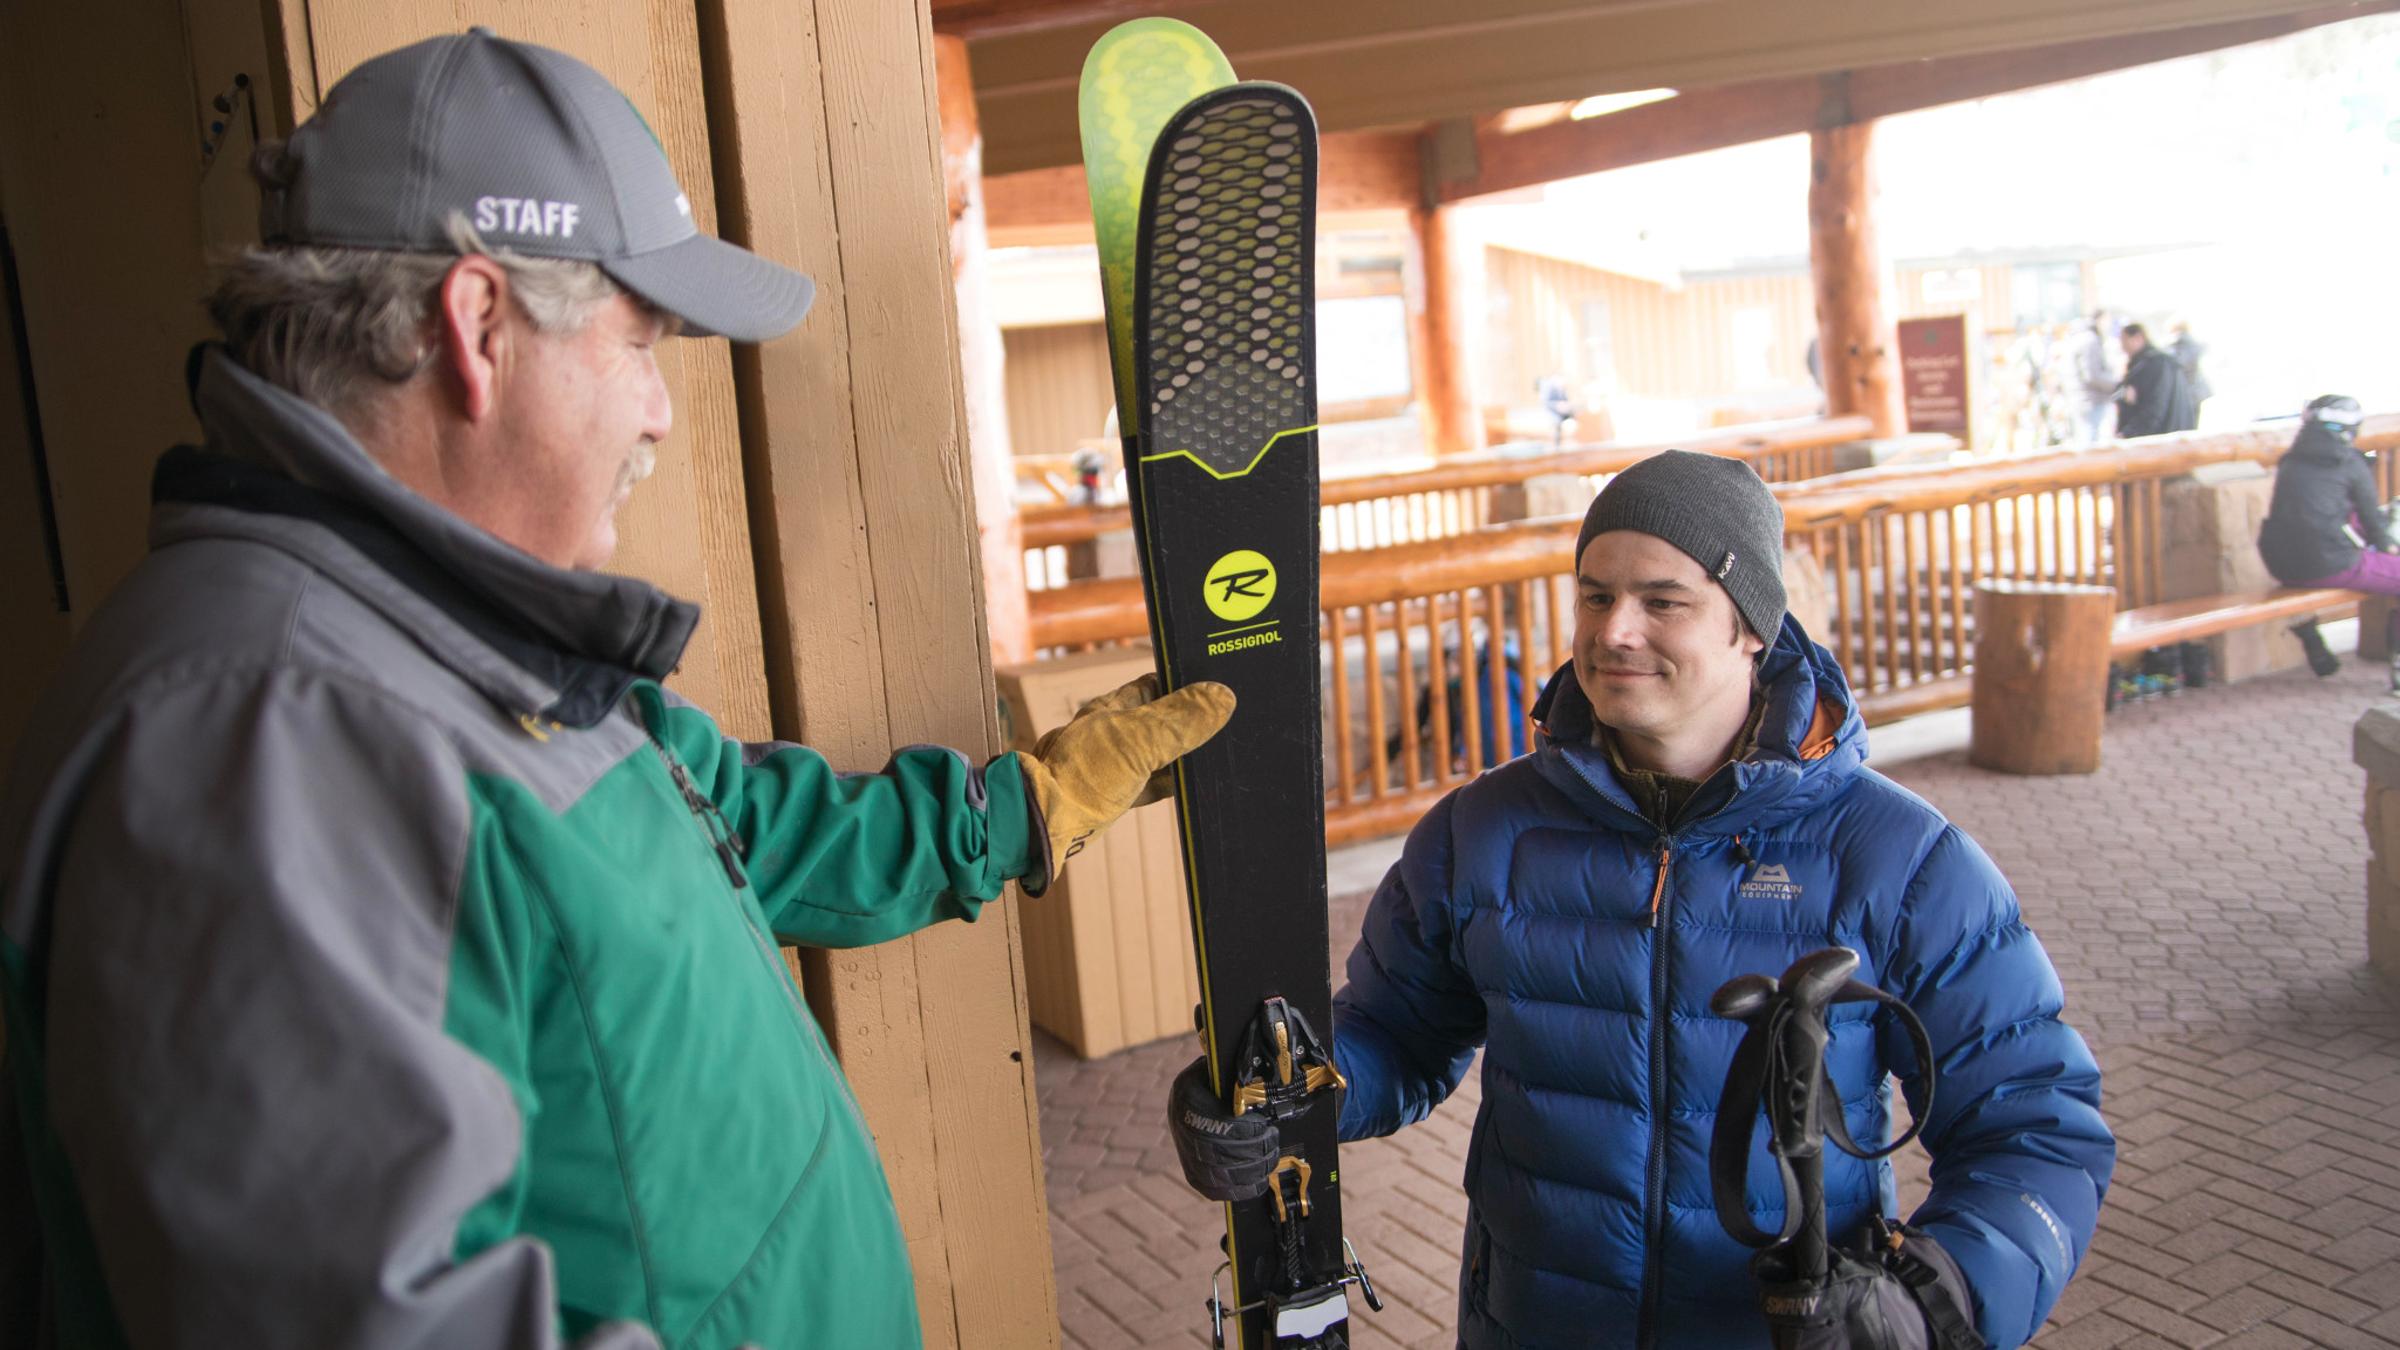 A guest receiving their skis from complimentary ski storage at Deer Valley Resort